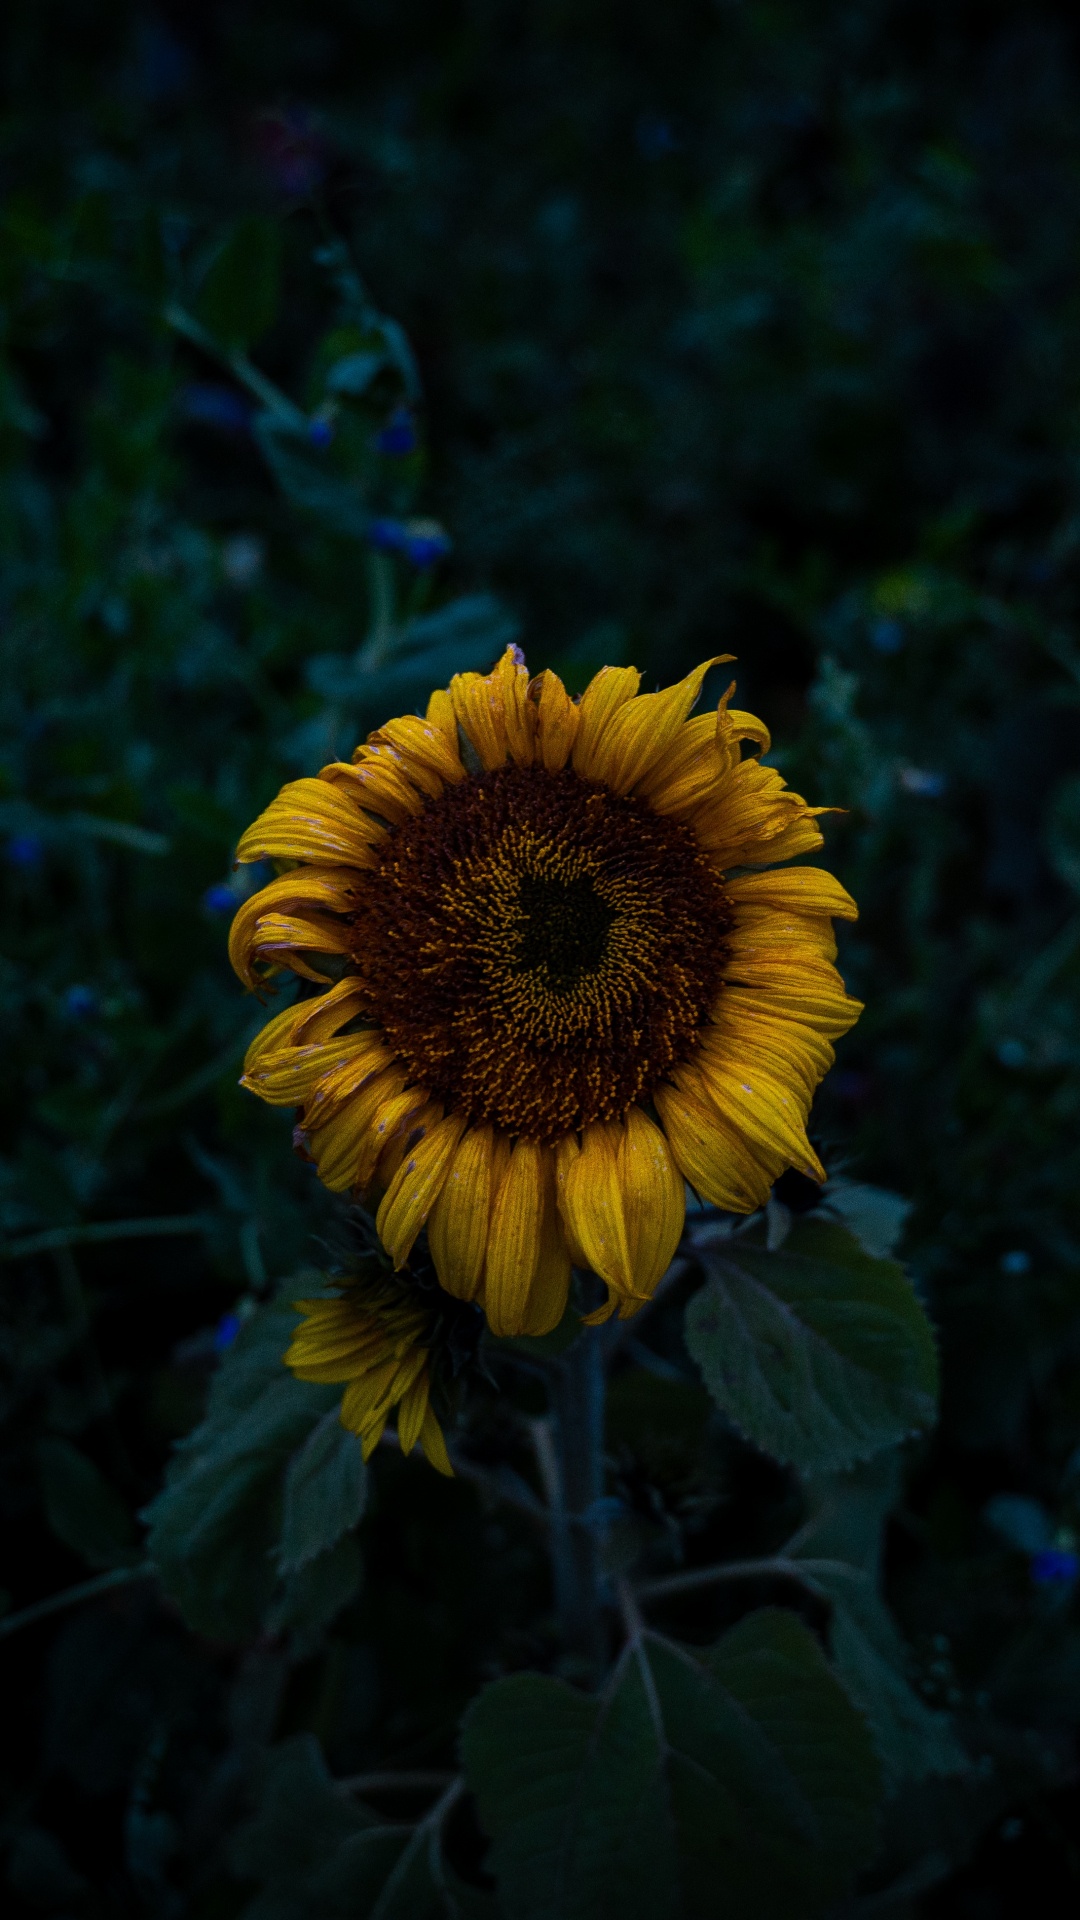 Yellow Sunflower in Bloom During Daytime. Wallpaper in 1080x1920 Resolution